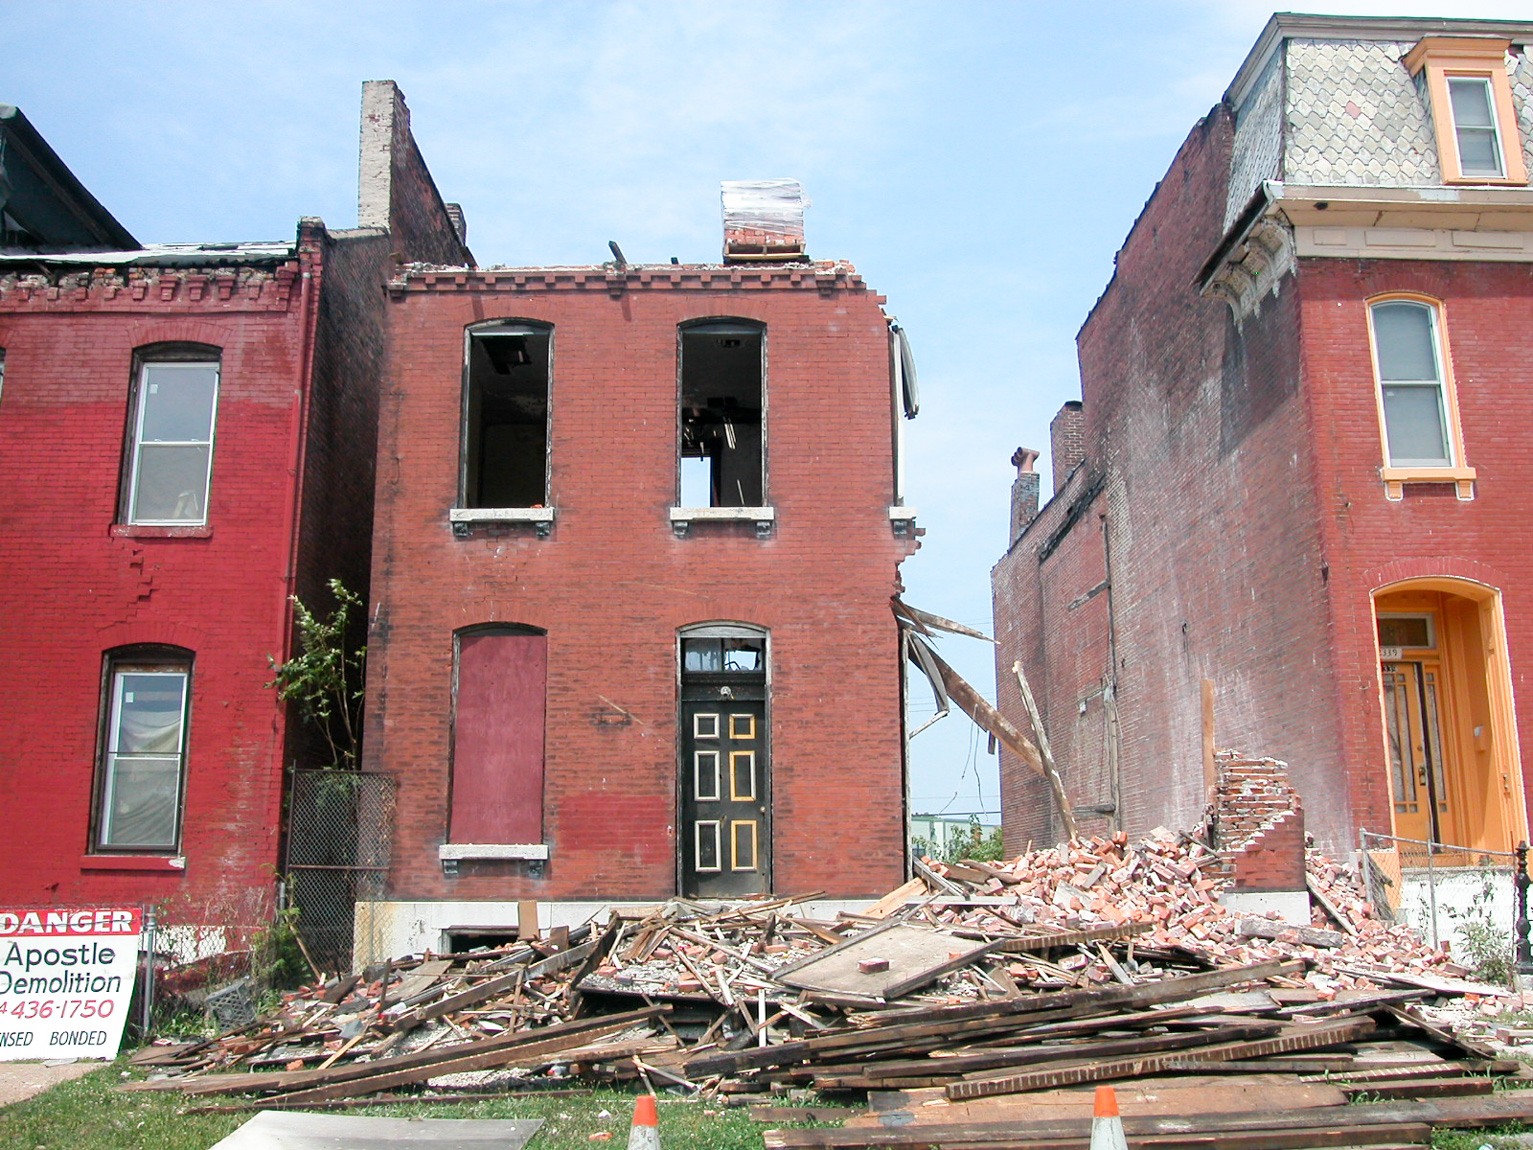 A townhouse in the process of demolition.